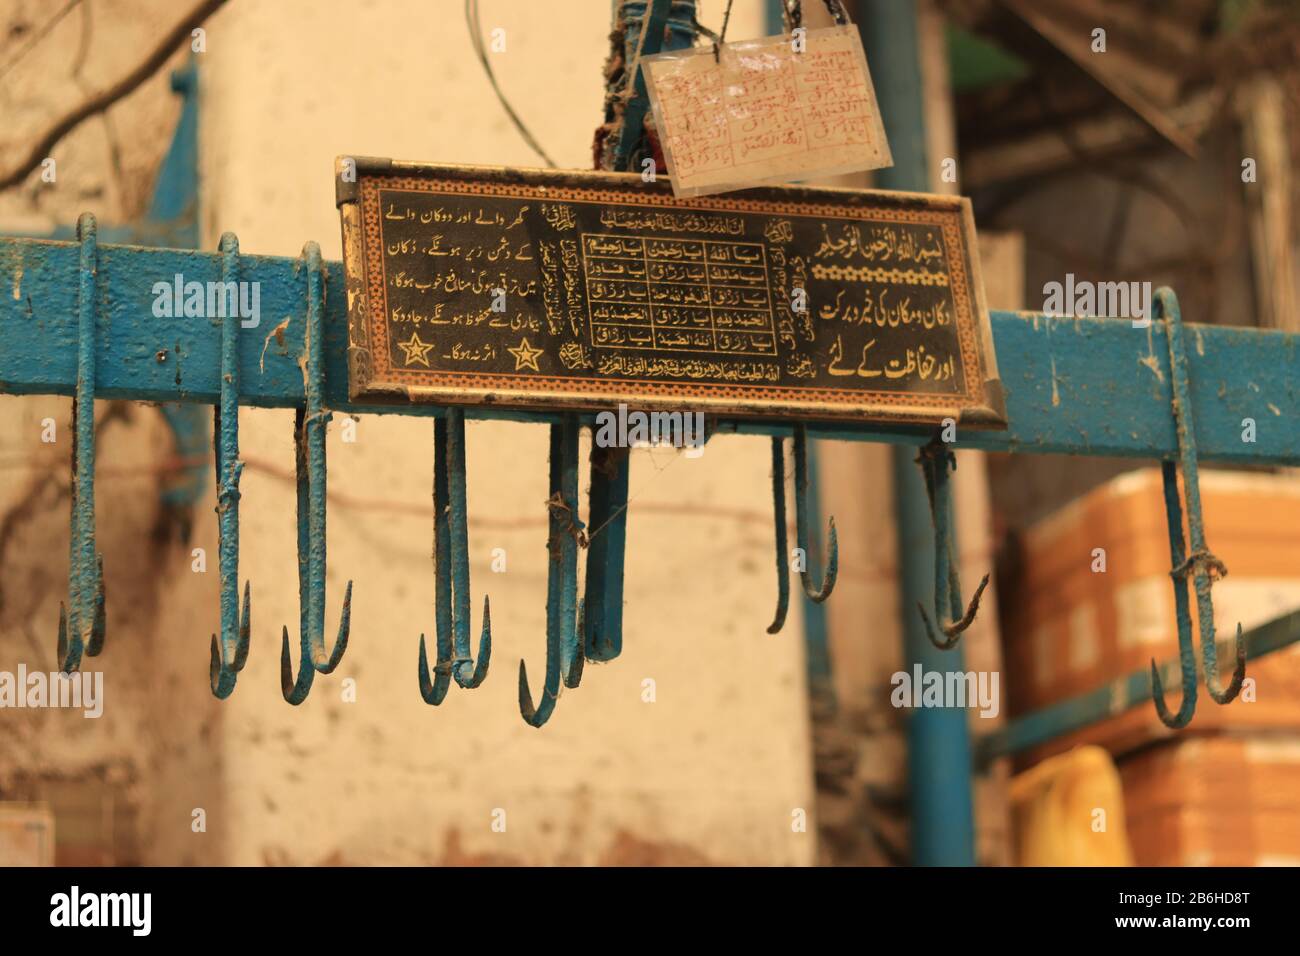 Arabic word in frame in the middle of meat hangers Stock Photo